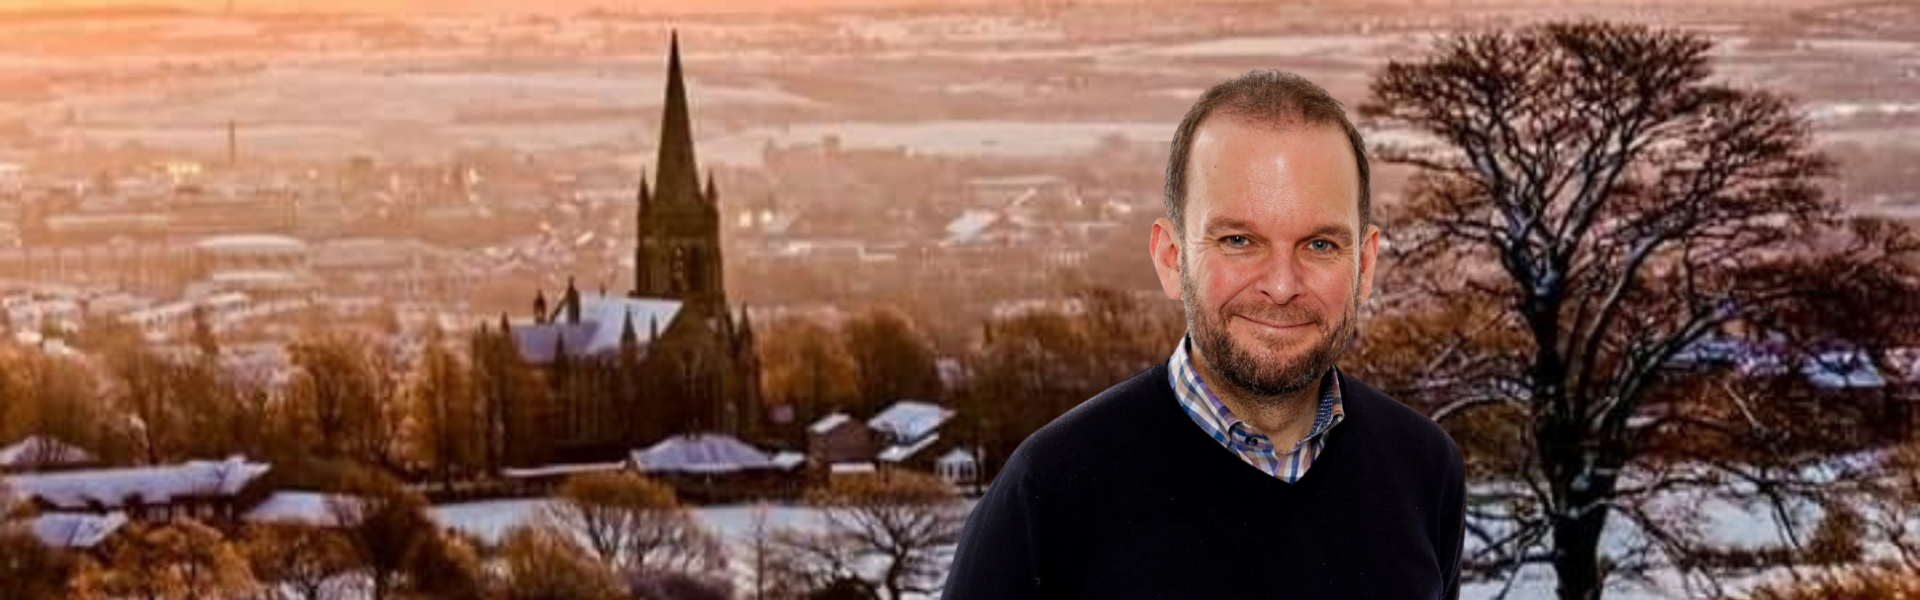  The image presents James Daly MP before a snow-draped Walshaw backdrop. His attire is casual with a dark sweater over a checkered shirt. The winter scene behind him showcases a church spire amid the snow-blanketed village, under a warm-hued sky.